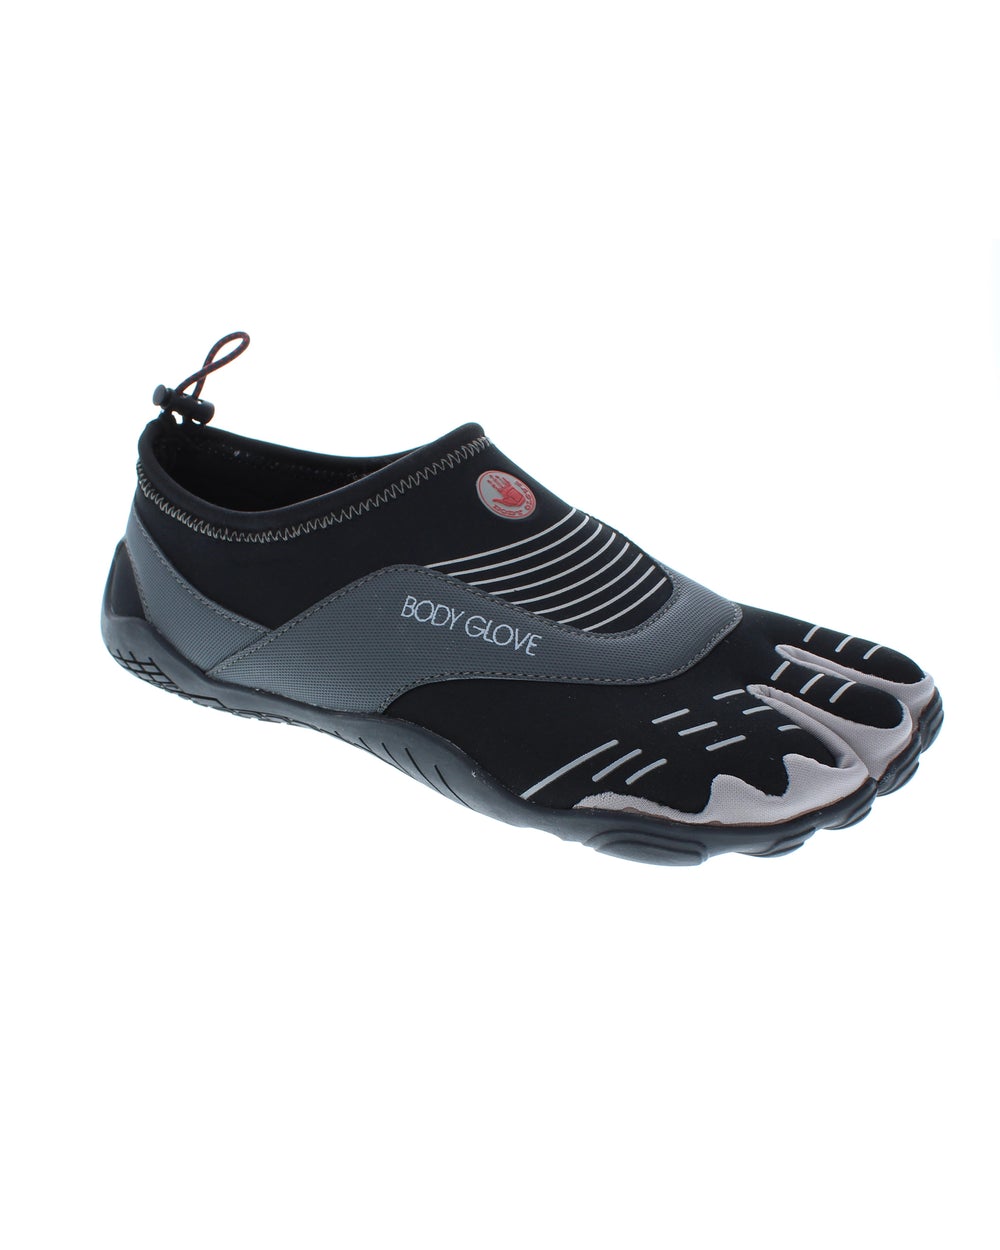 MEN'S 3T BAREFOOT CINCH WATER SHOES - BLACK/RIO RED